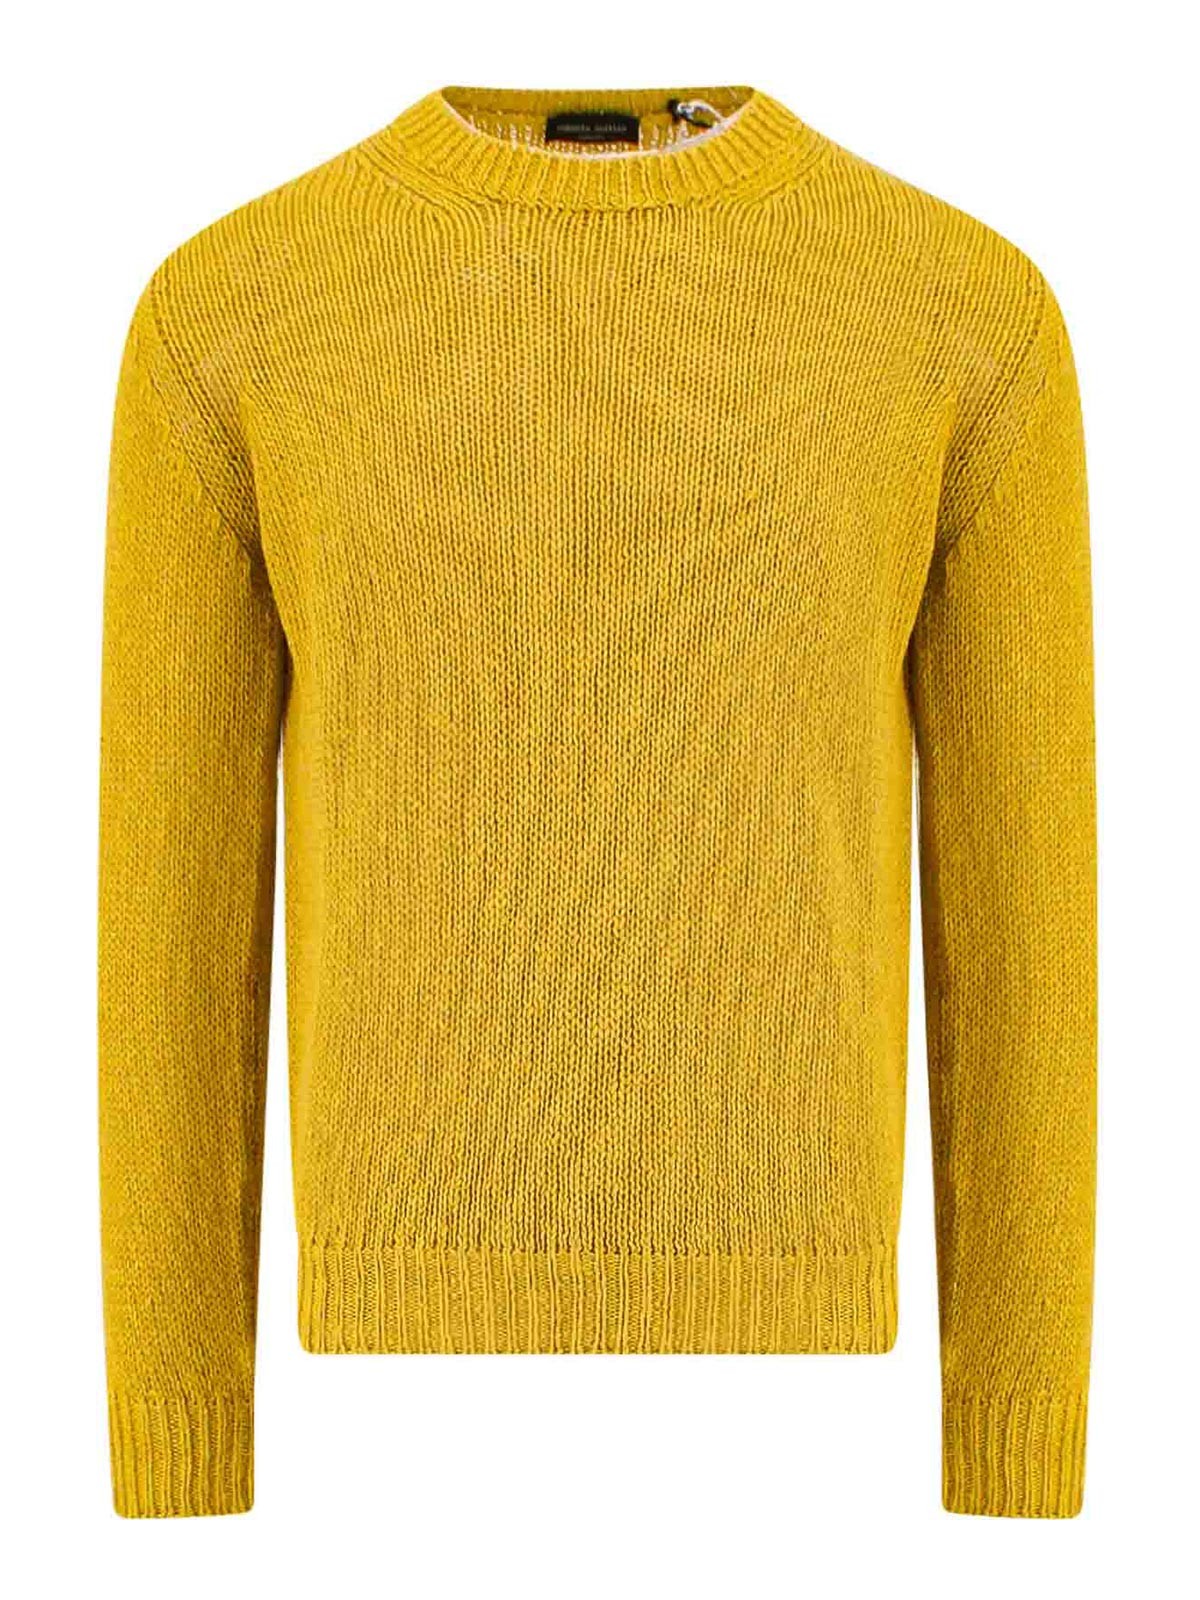 Roberto Collina Cotton And Linen Jumper In Yellow